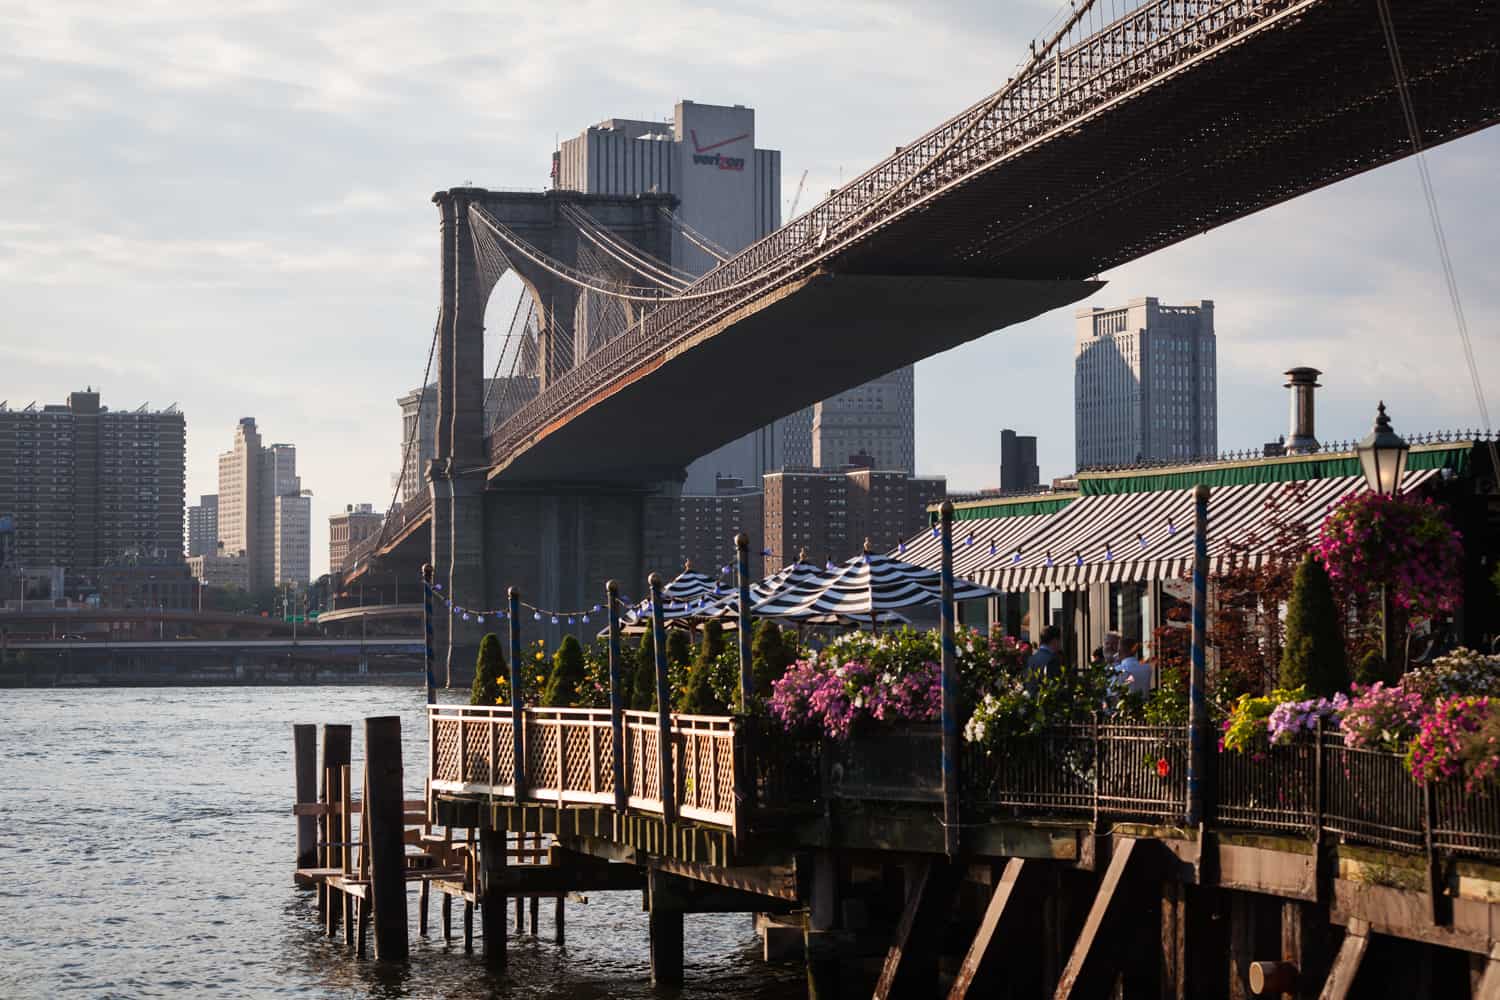 Exterior view of The River Cafe and Brooklyn Bridge